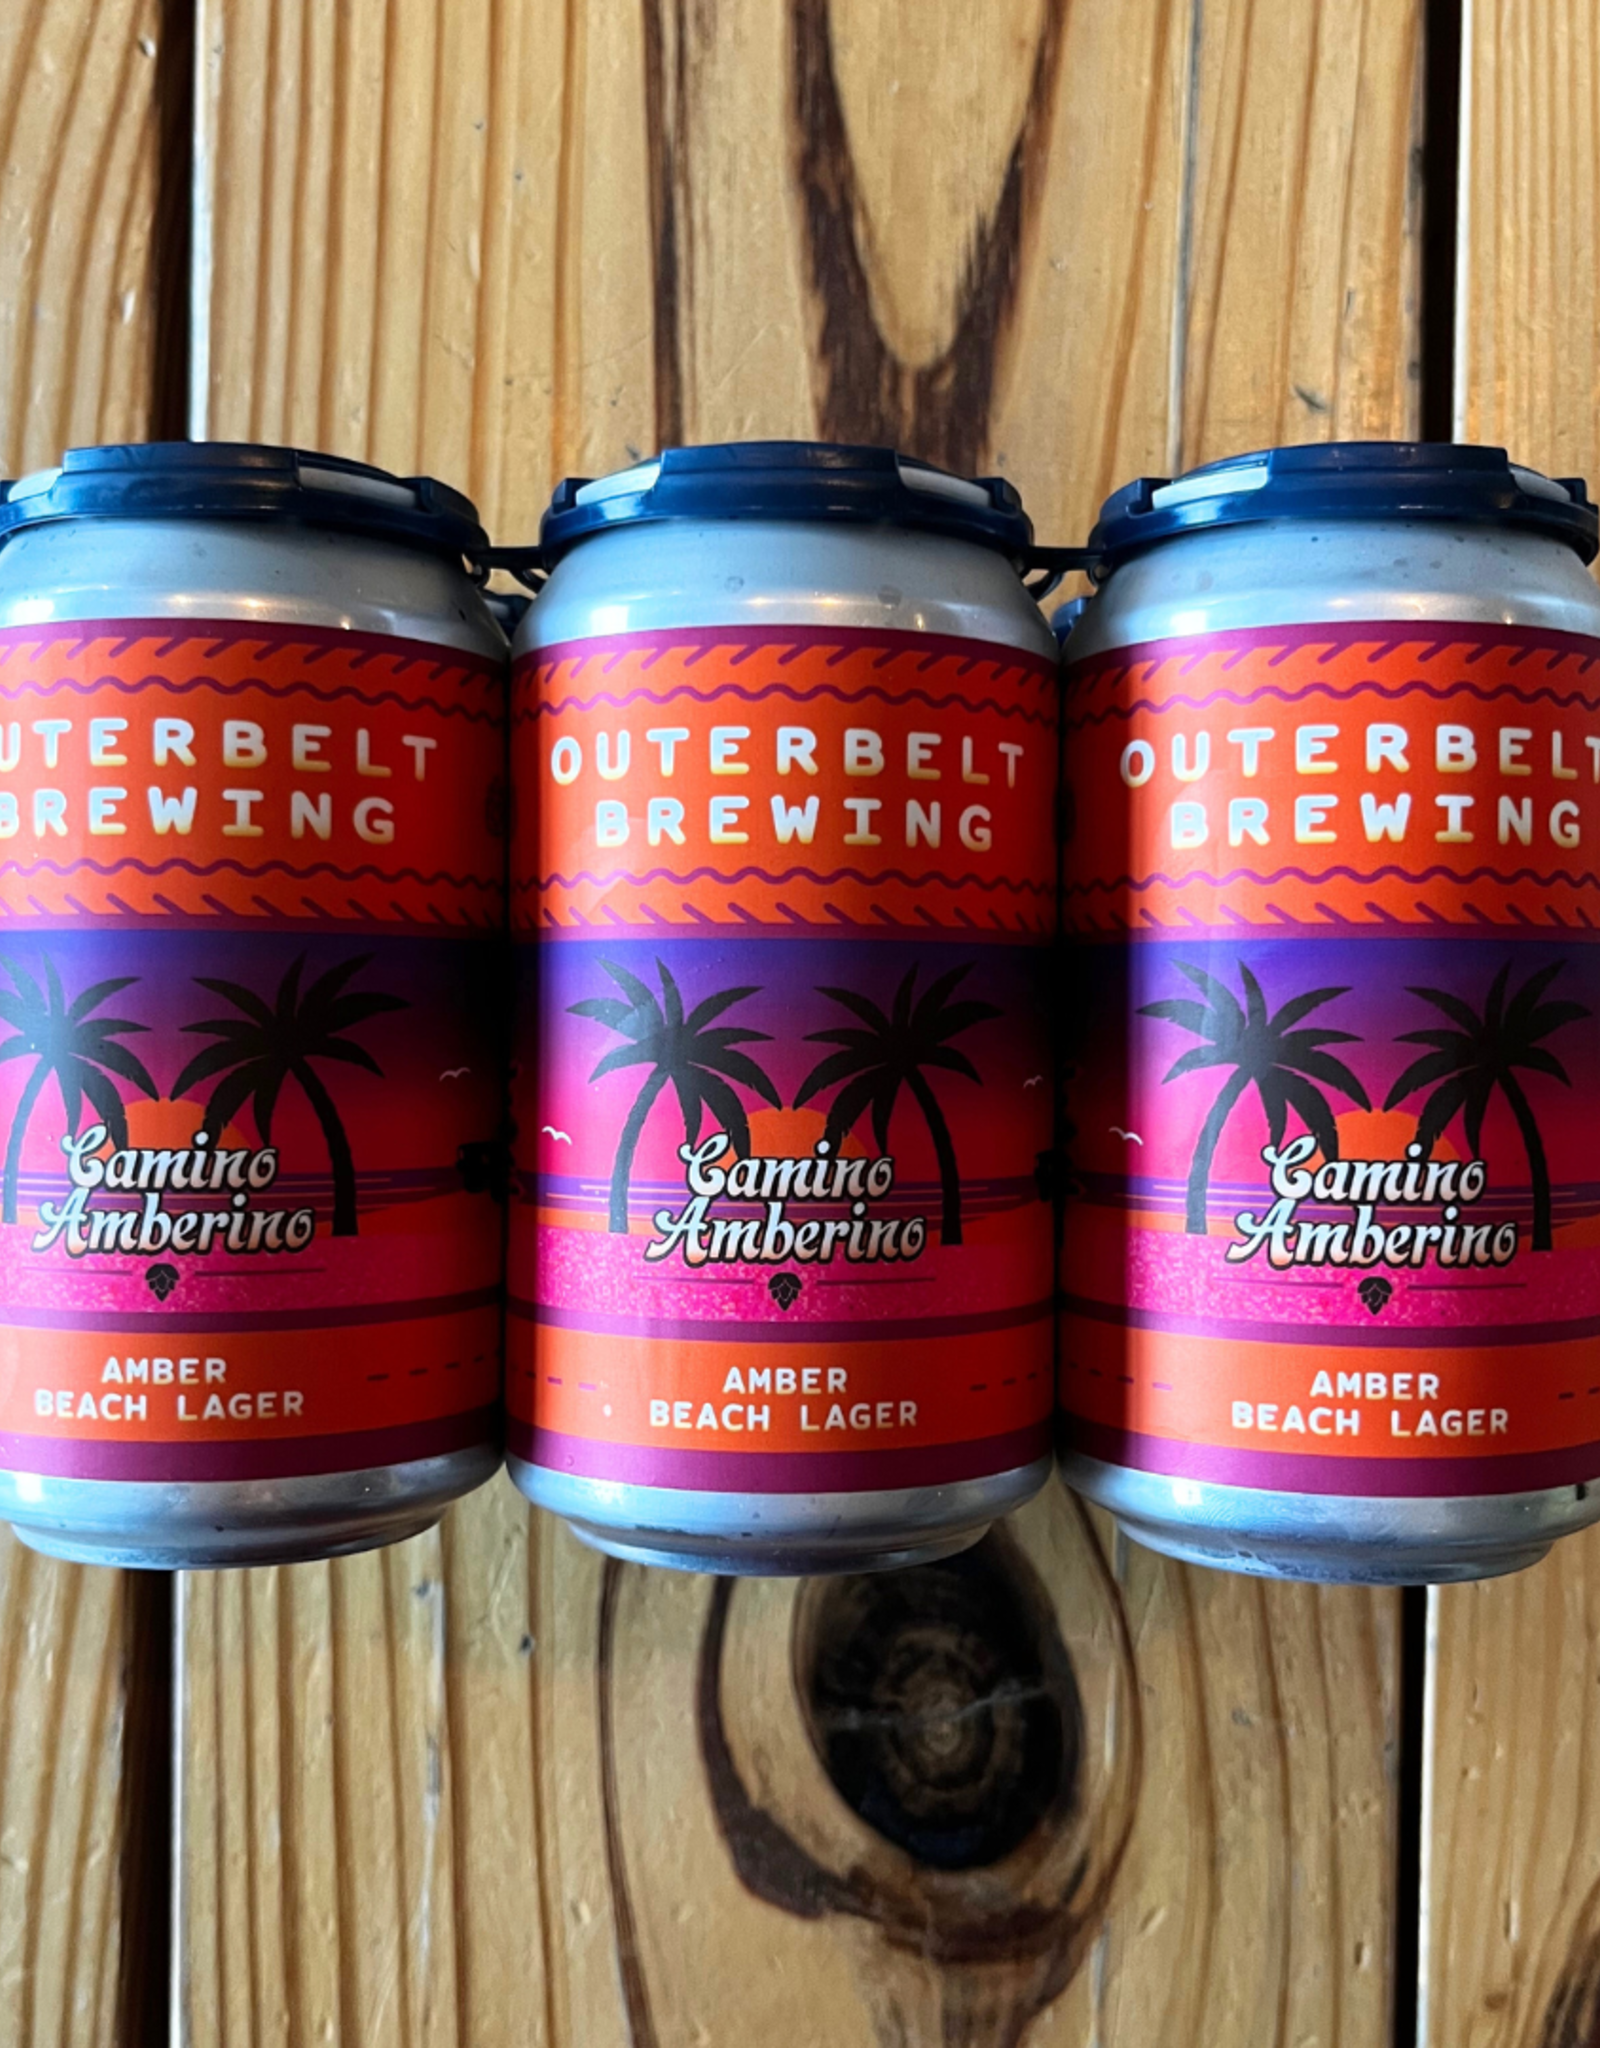 6 PACK Outerbelt Camino Amberino Mexican Amber Lager